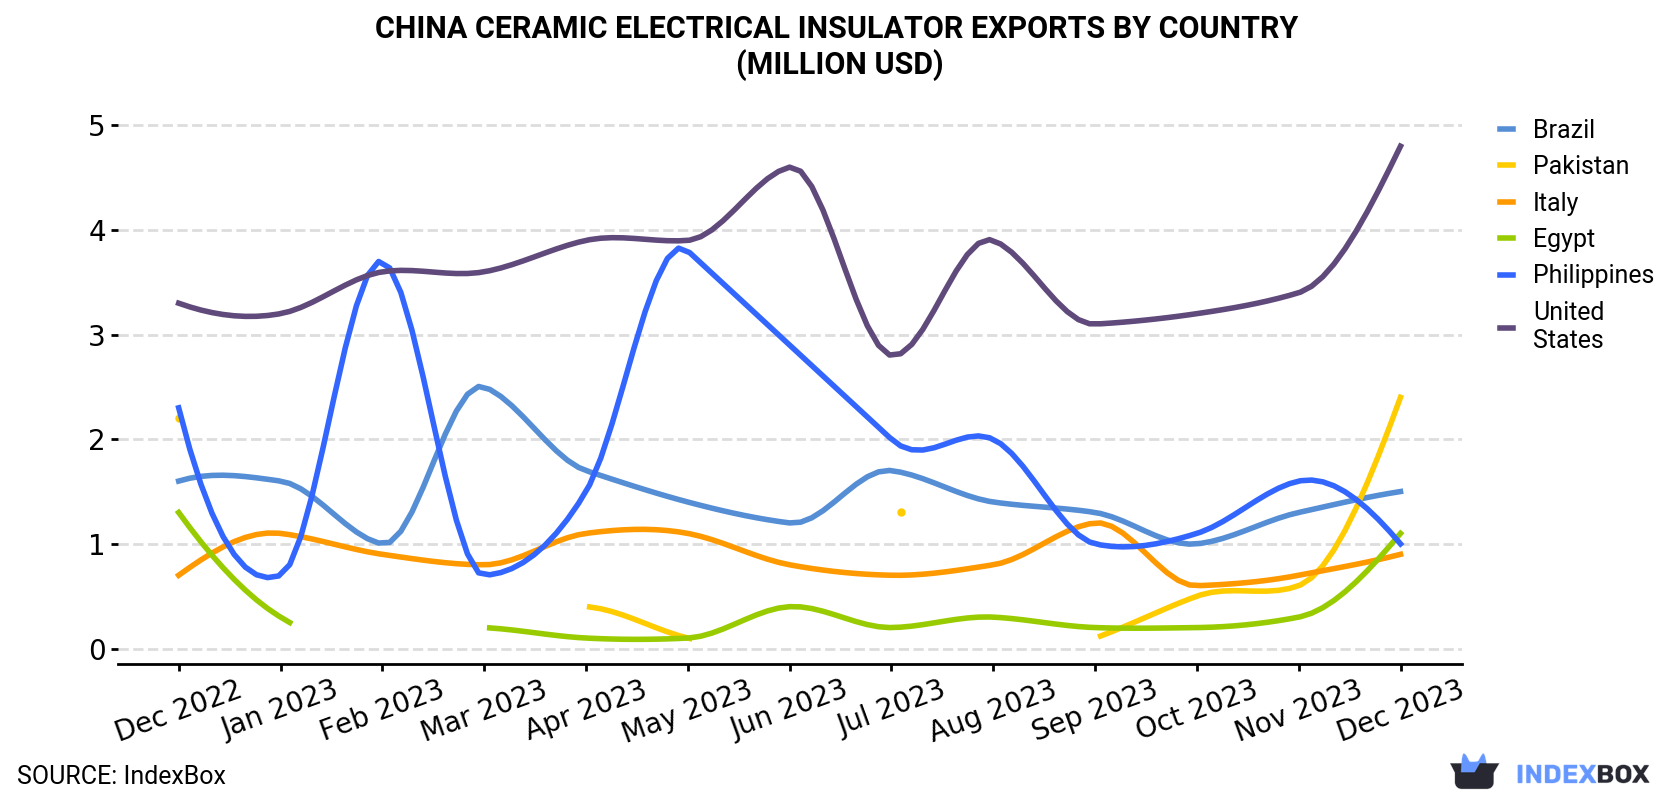 China Ceramic Electrical Insulator Exports By Country (Million USD)